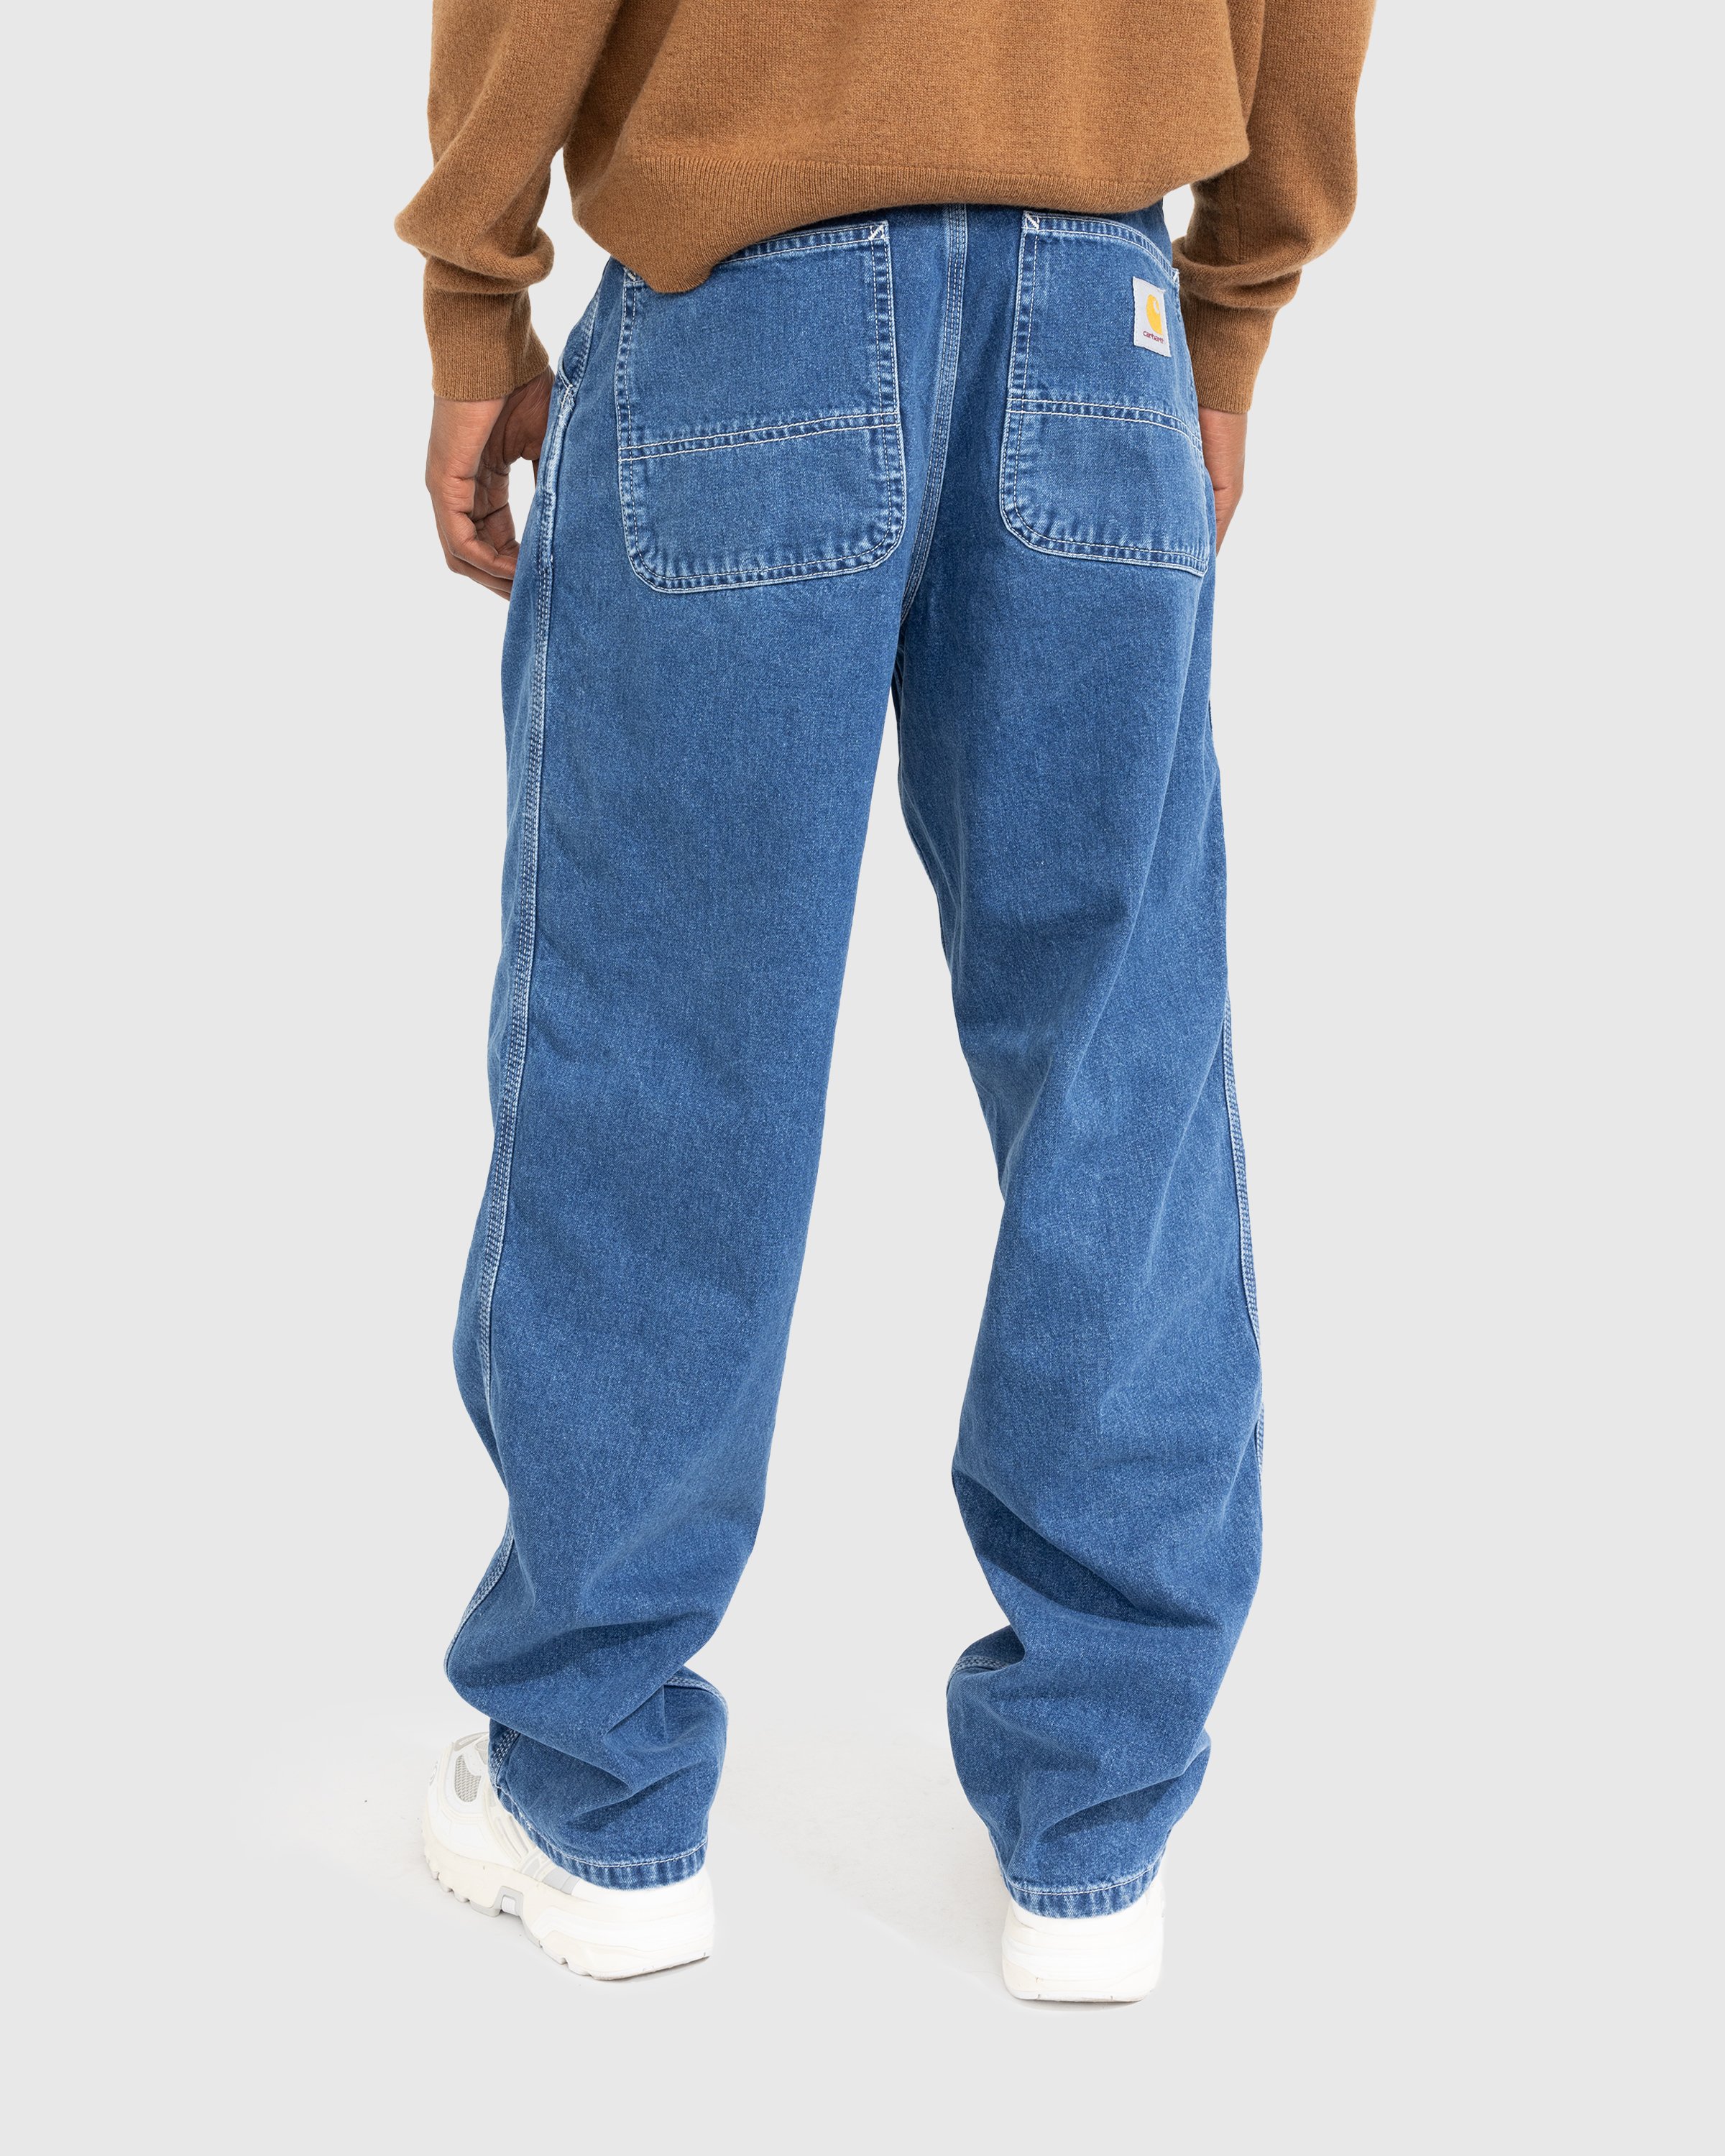 Carhartt WIP - Simple Pant Blue/Stone-Washed - Clothing - Blue - Image 3